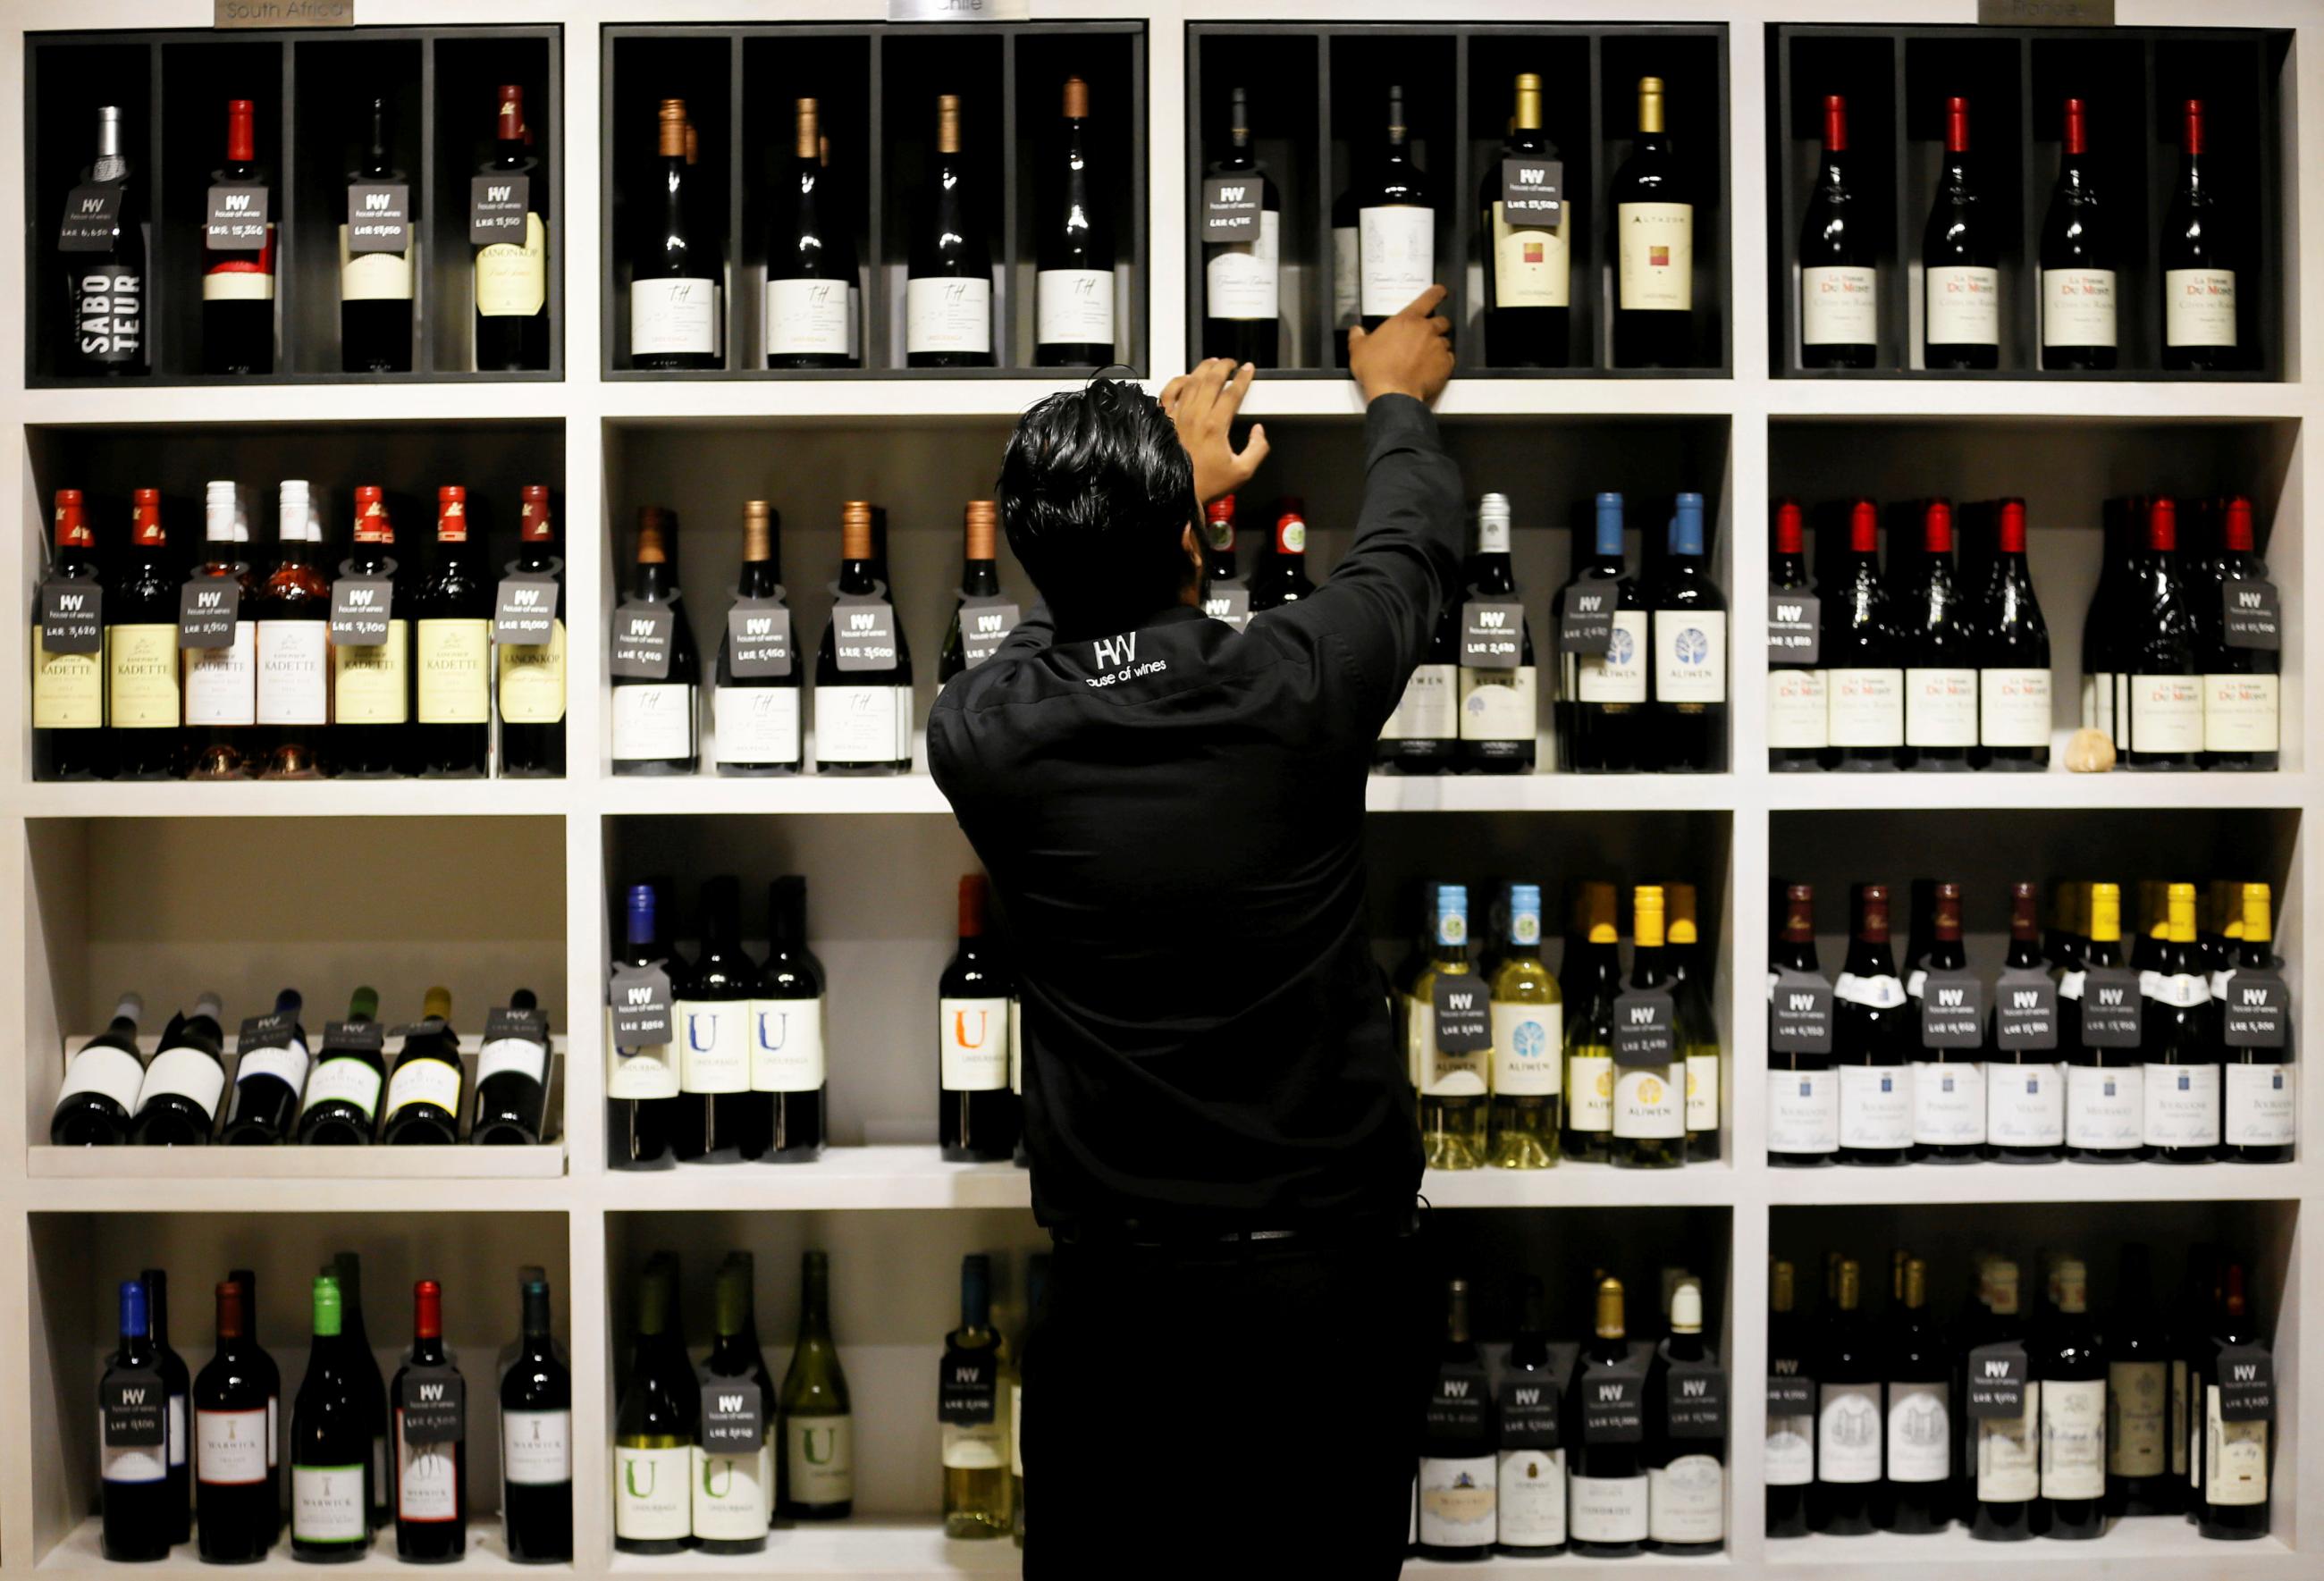 A man takes a bottle of wine from a shelf for a customer.